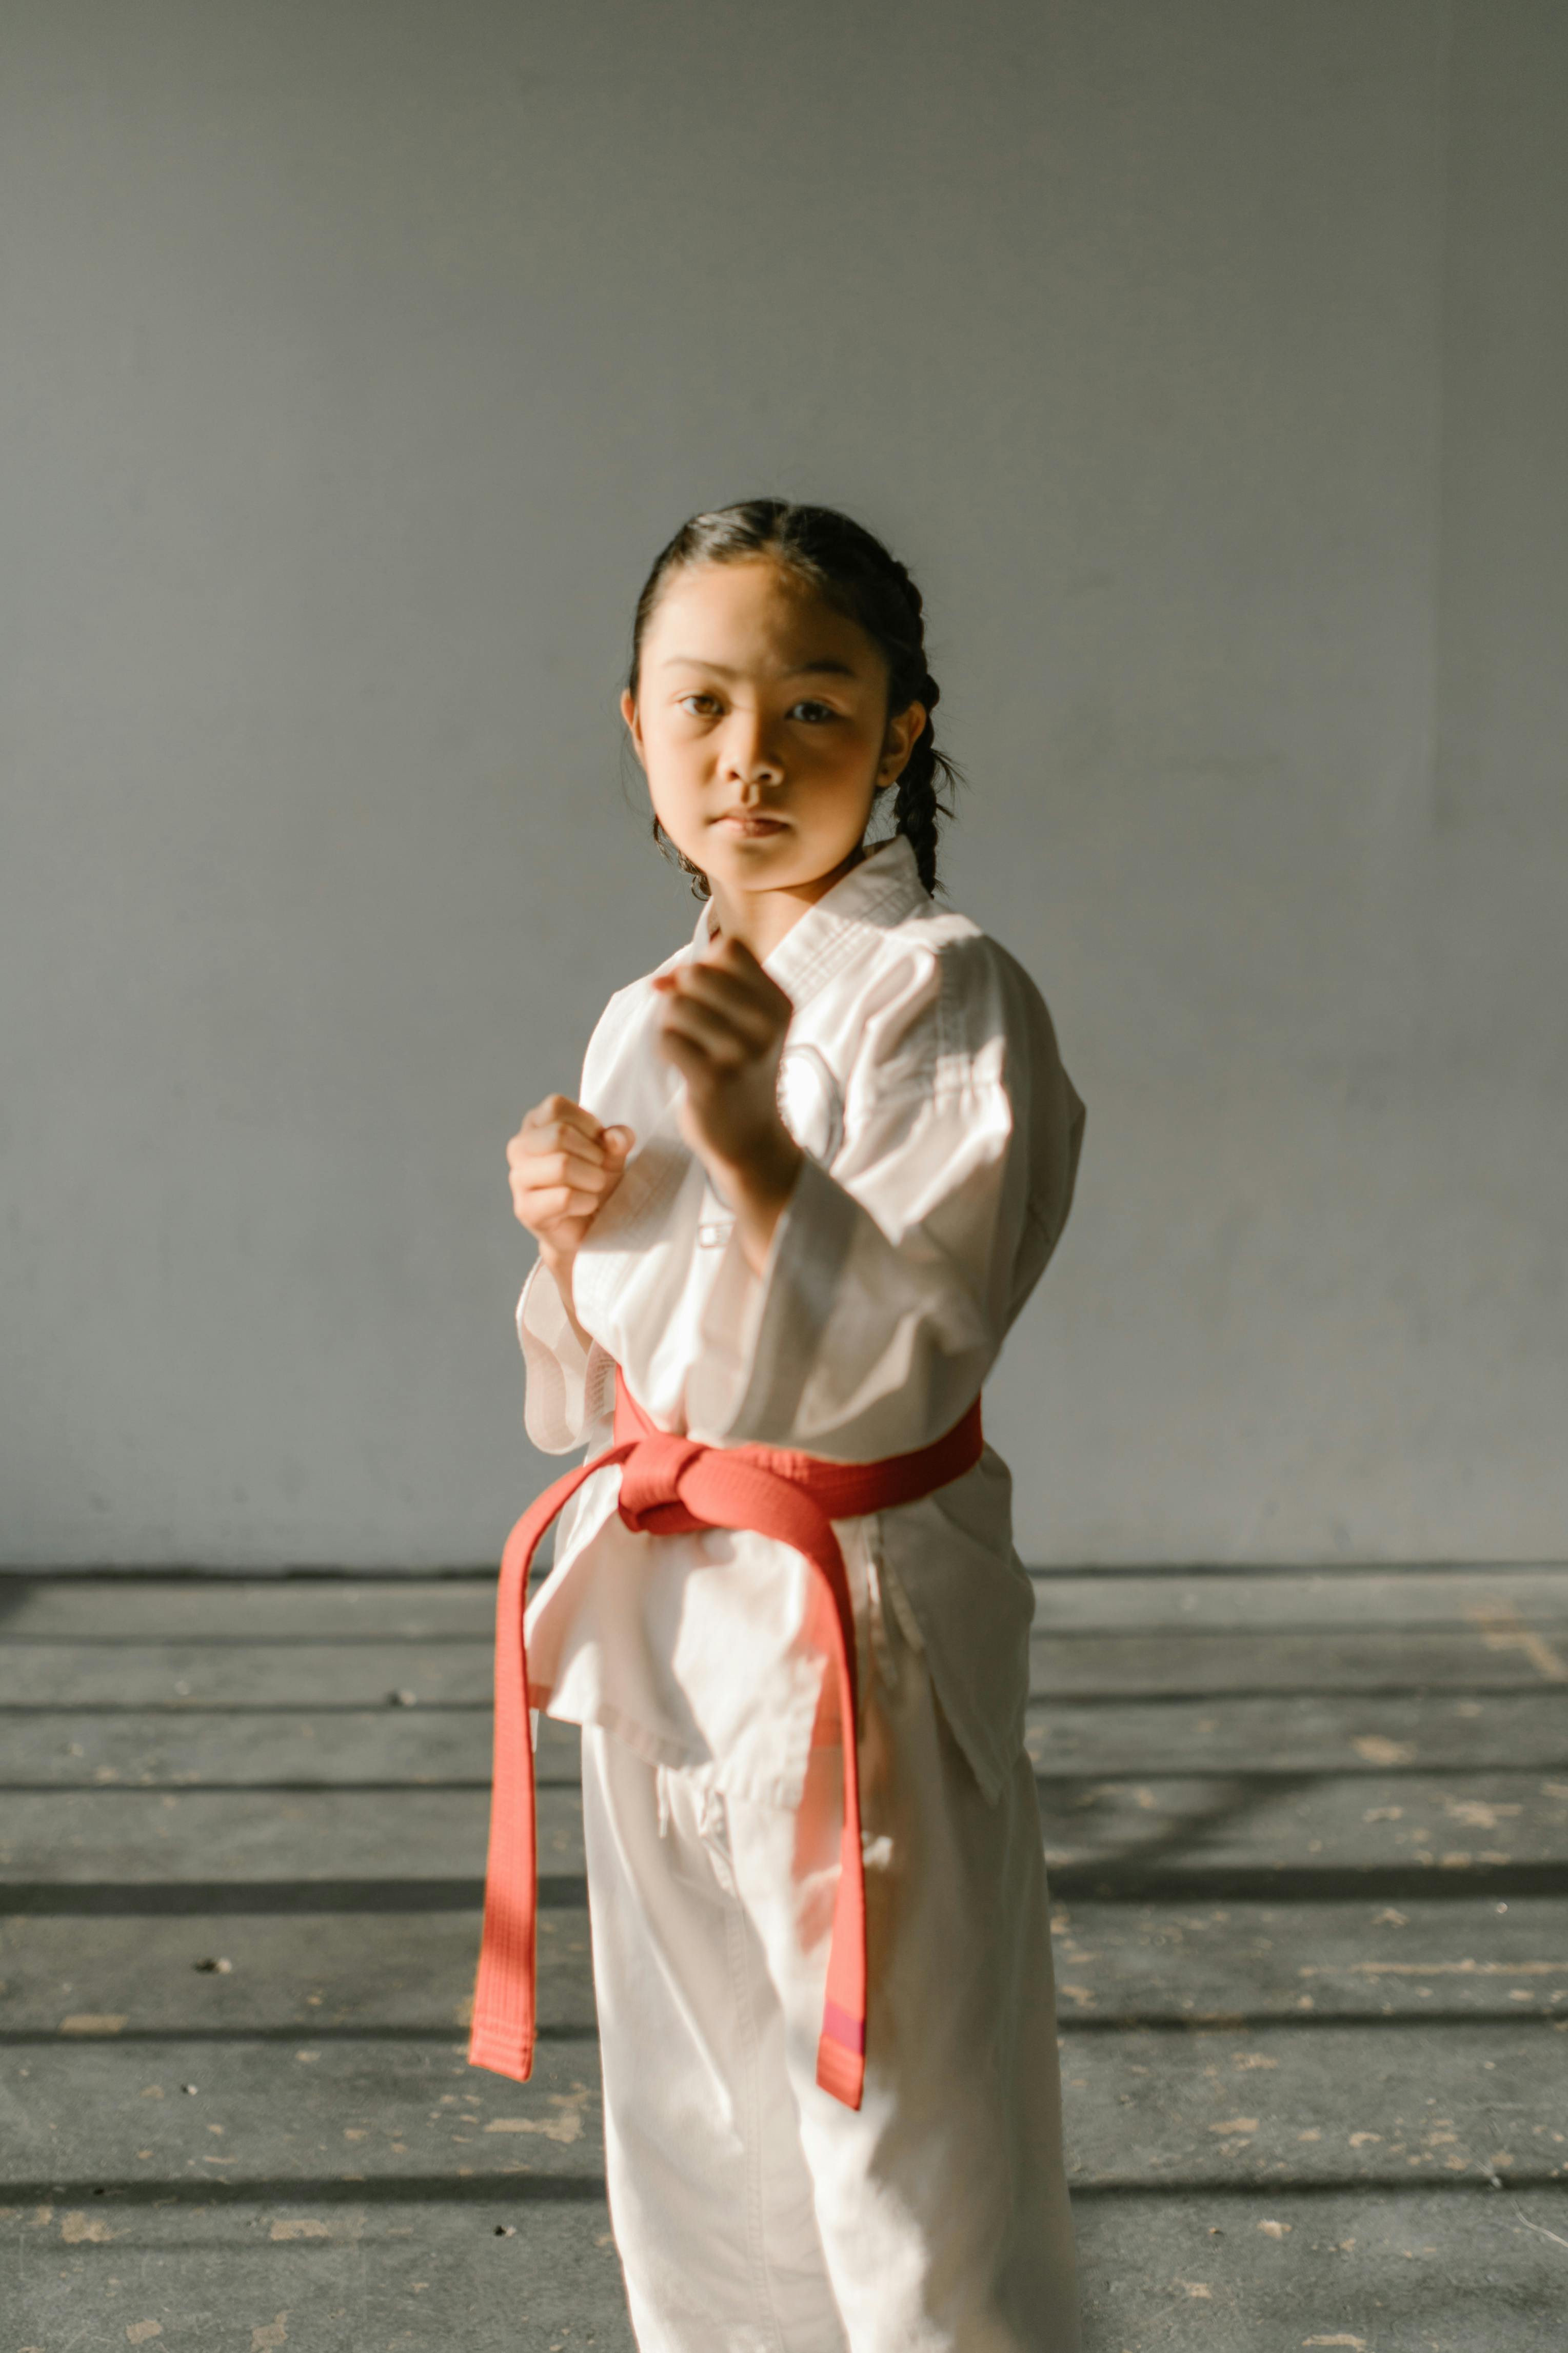 Brill's Karate - From $17 - Spotswood, NJ | Groupon